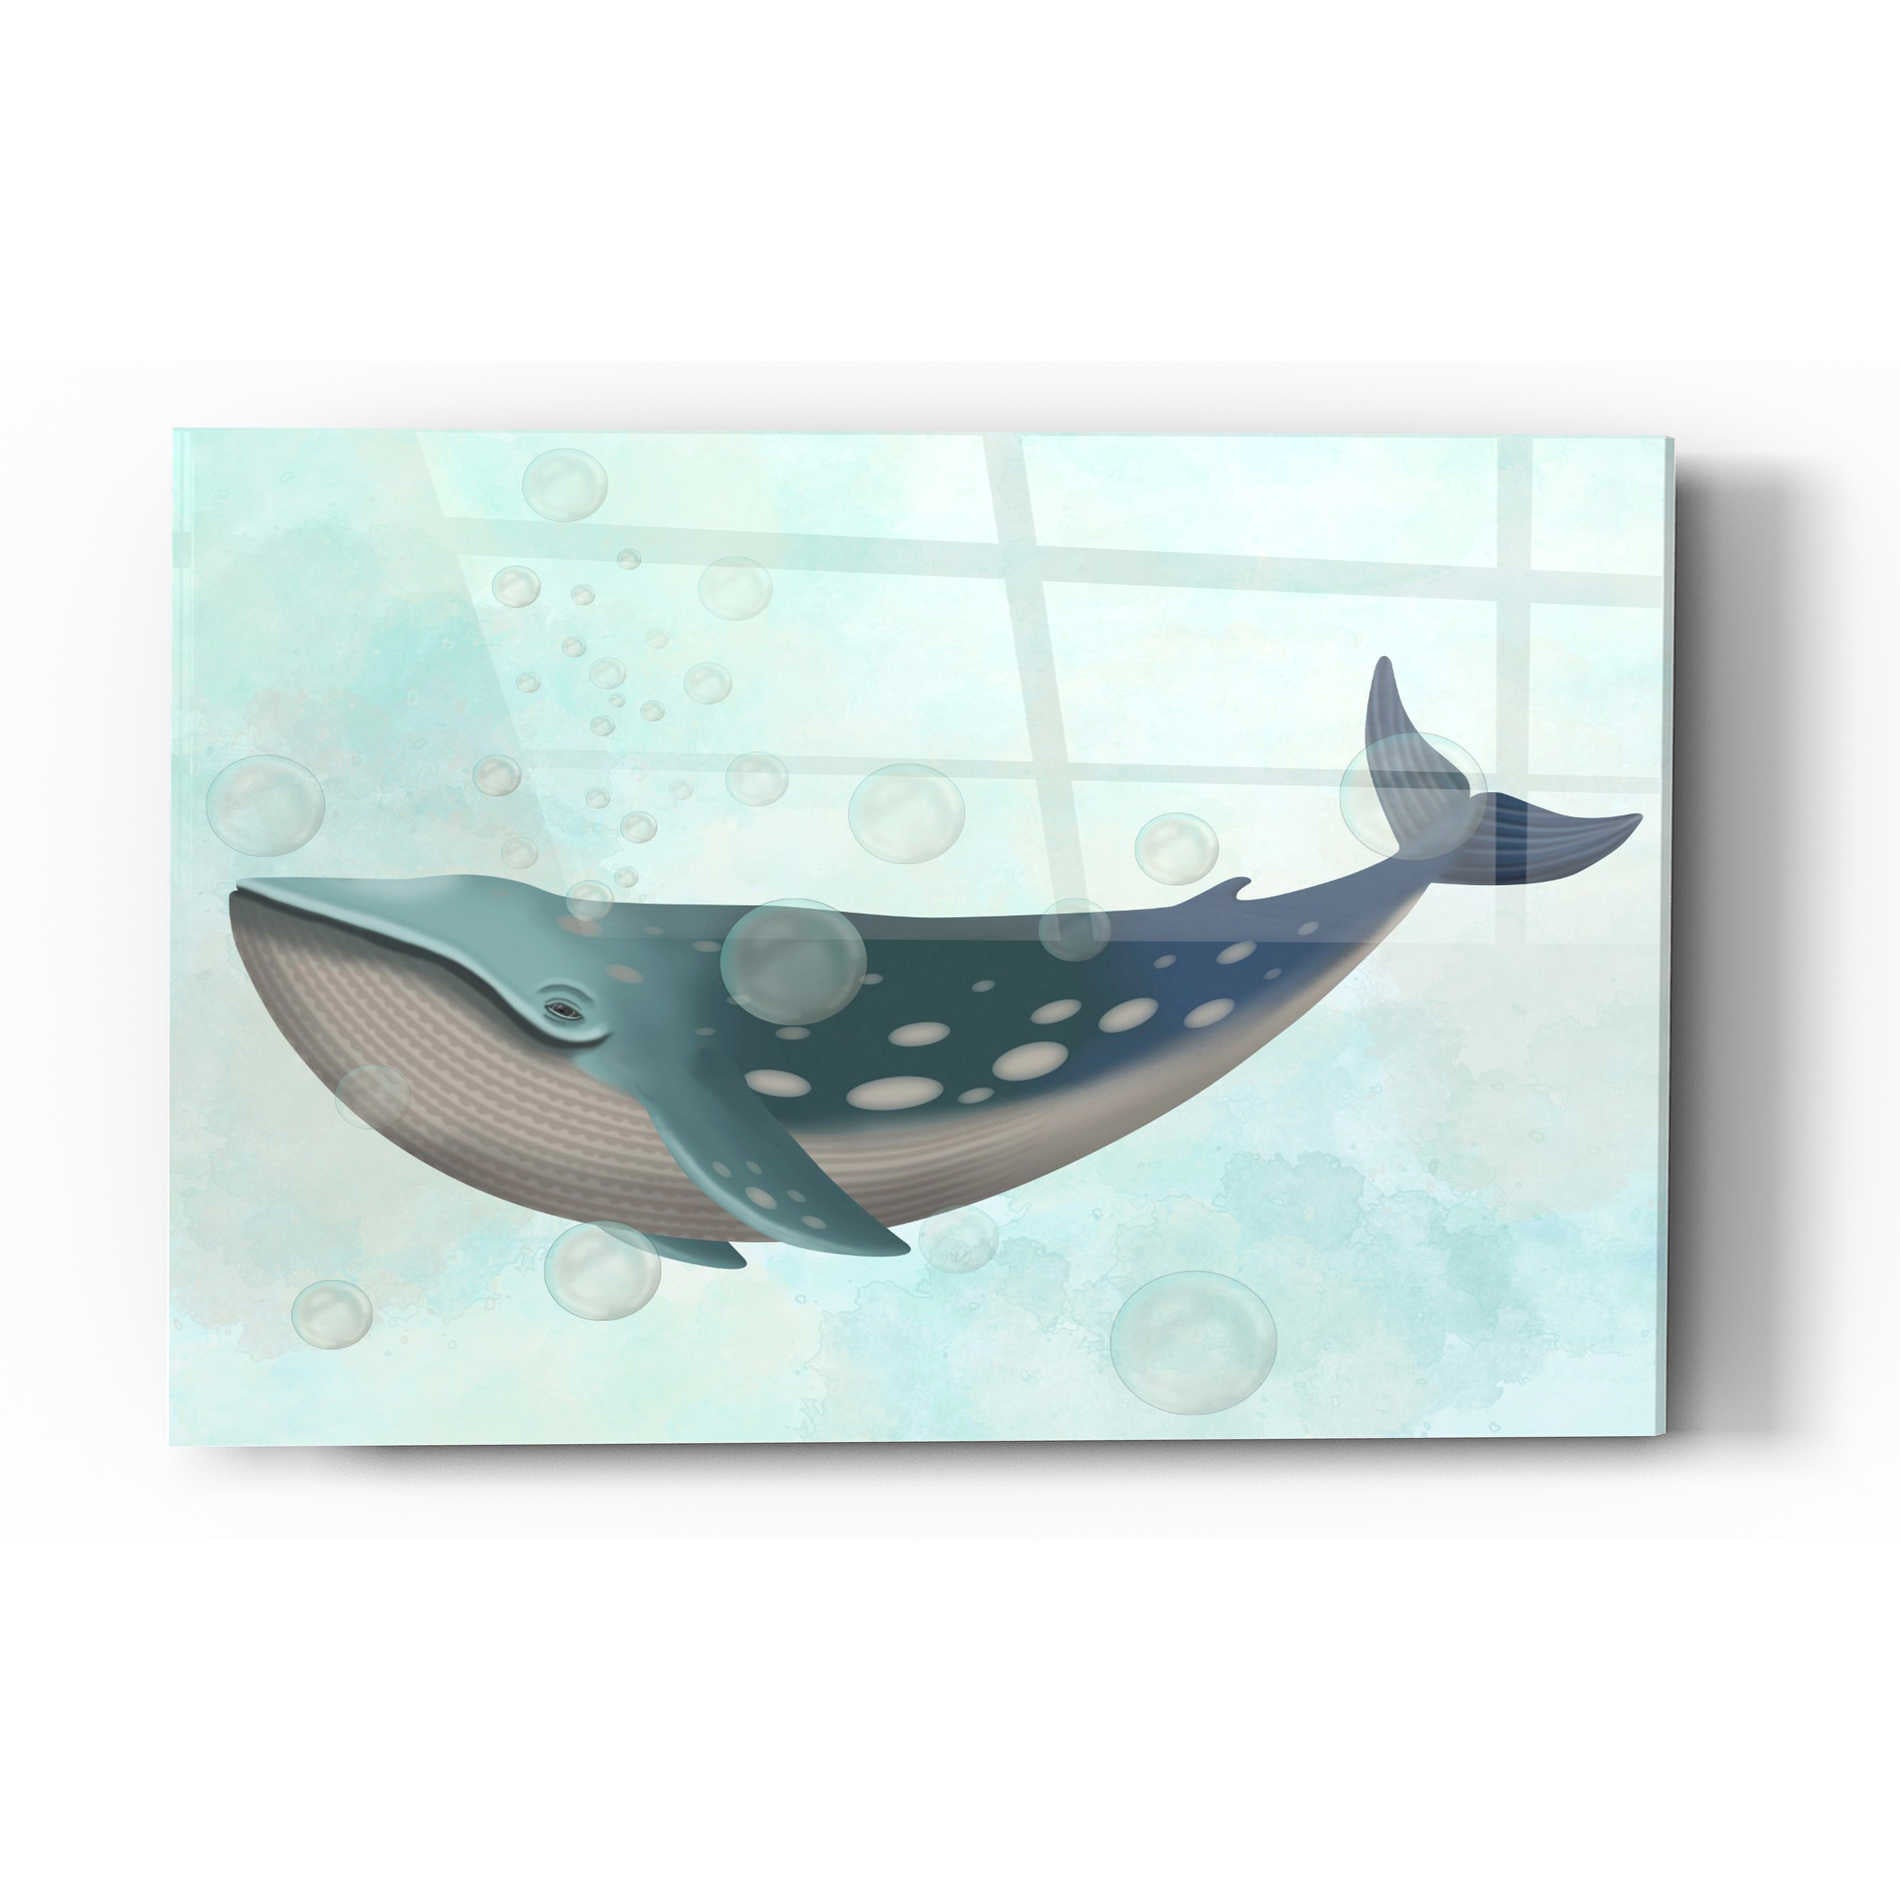 Epic Art 'Whale Bubbles 1' by Fab Funky Acrylic Glass Wall Art,16x24